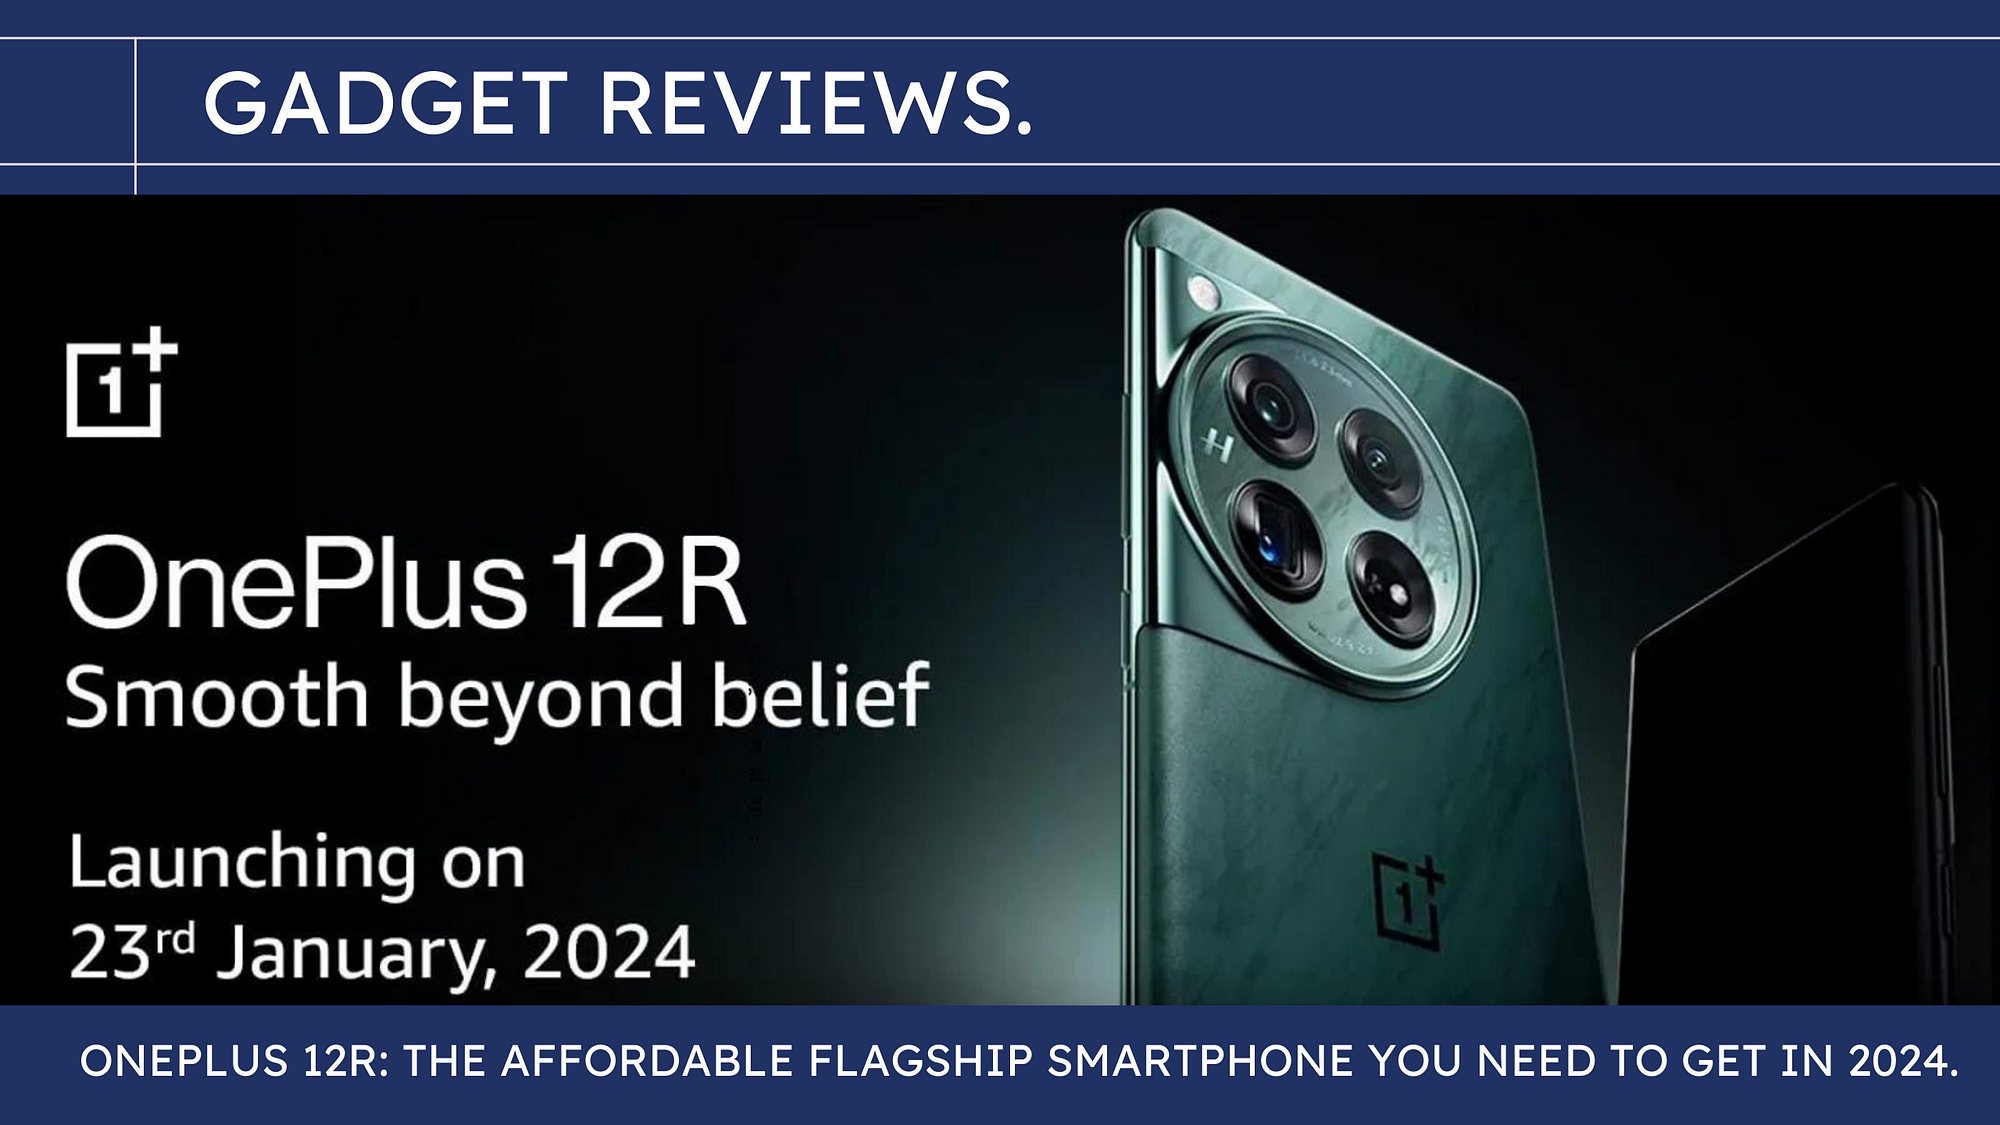 OnePlus 12R Review: The Budget Flagship Killer of 2024., by Jackson Luca